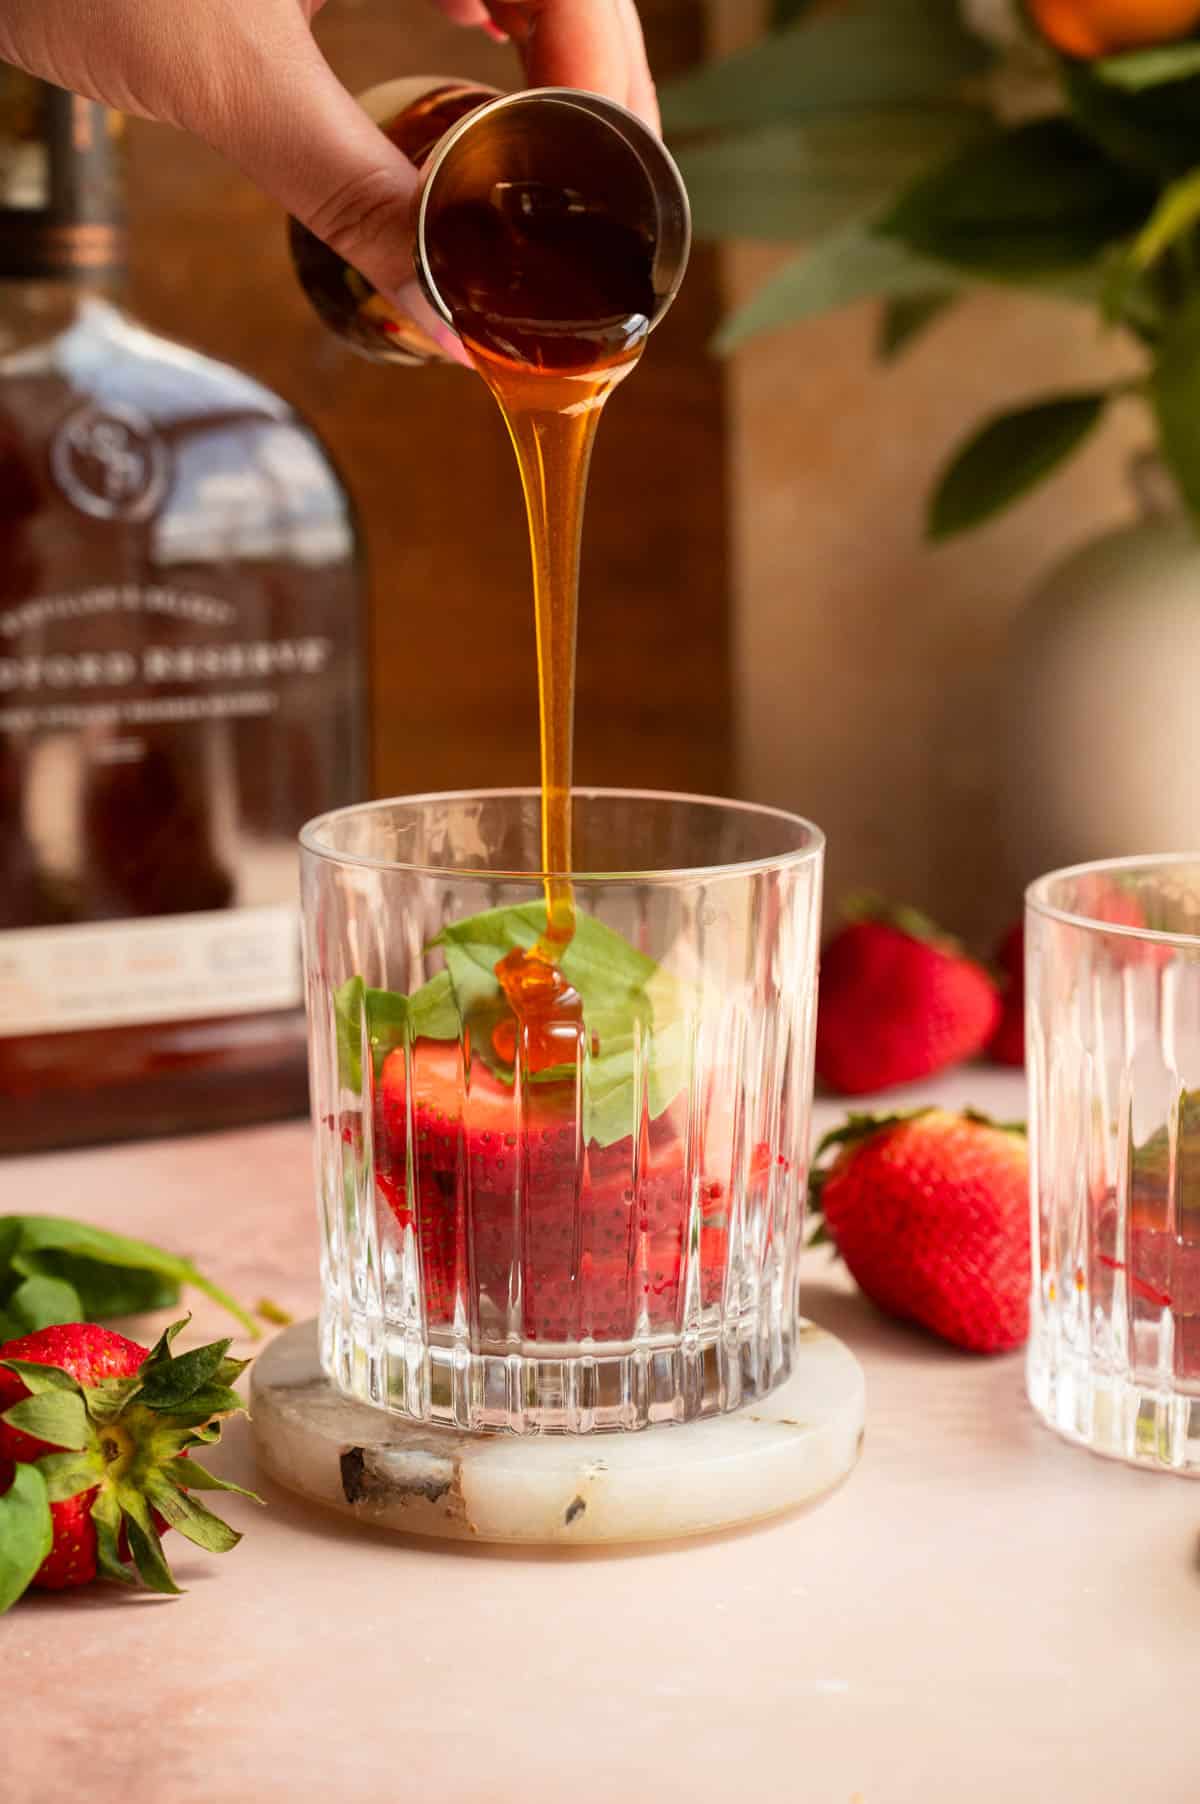 Strawberries and basil in a rocks glass with hot honey being poured over them.